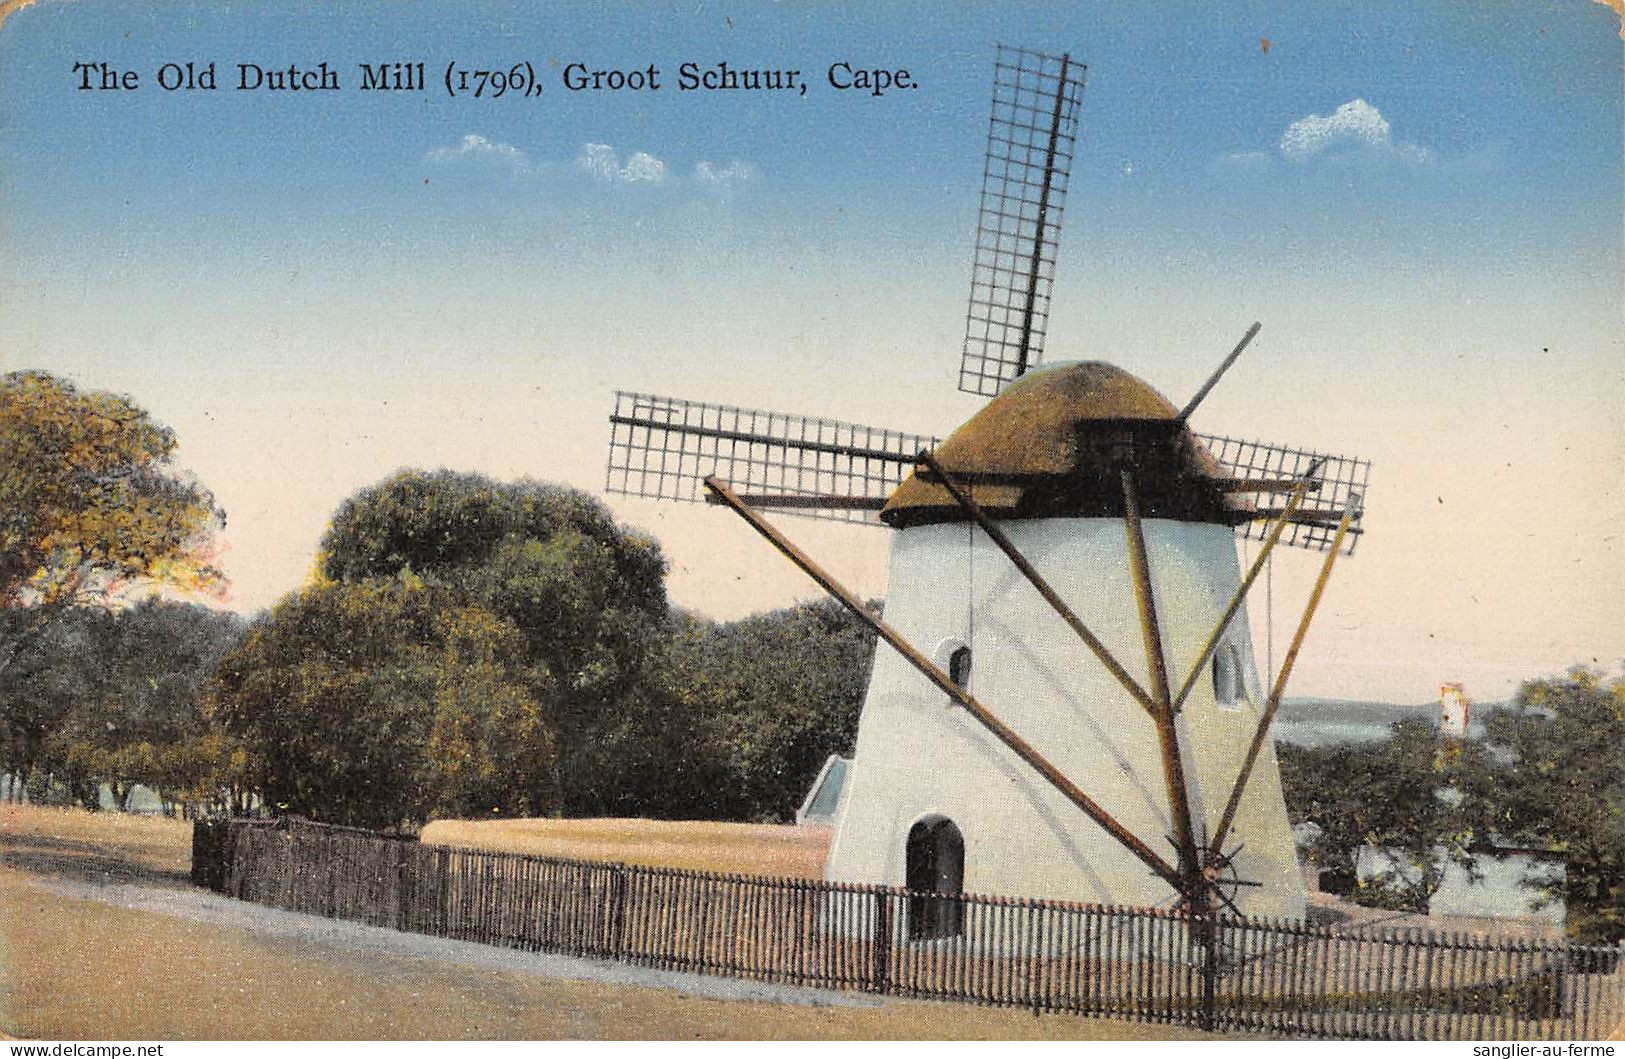 CPA / AFRIQUE DU SUD / THE OLD DUTSCH MILL / GROOT SCHUUR / CAPE - South Africa